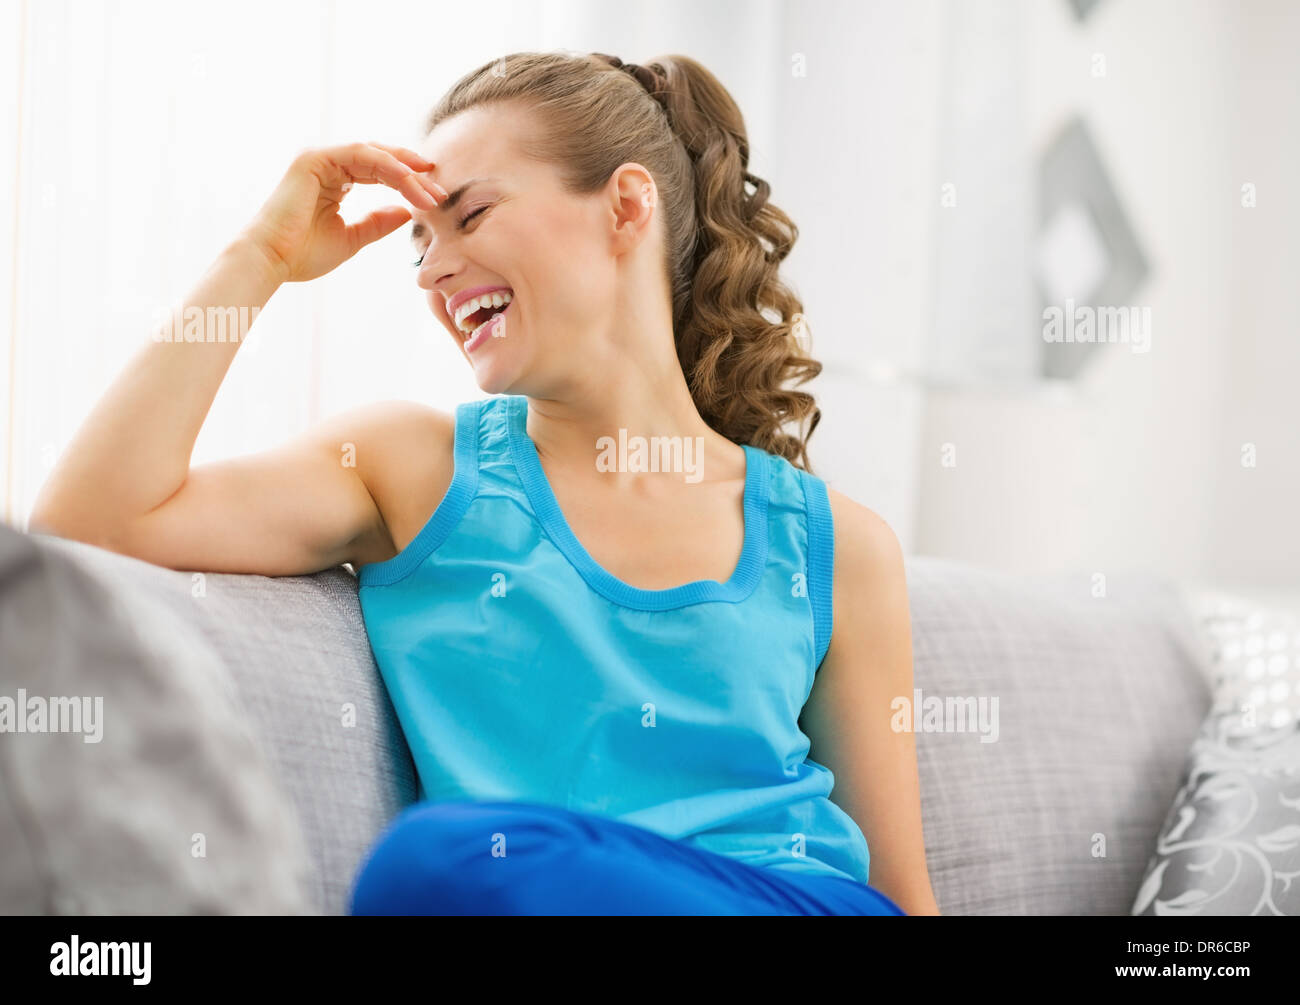 Young woman sitting on sofa and laughing Stock Photo - Alamy